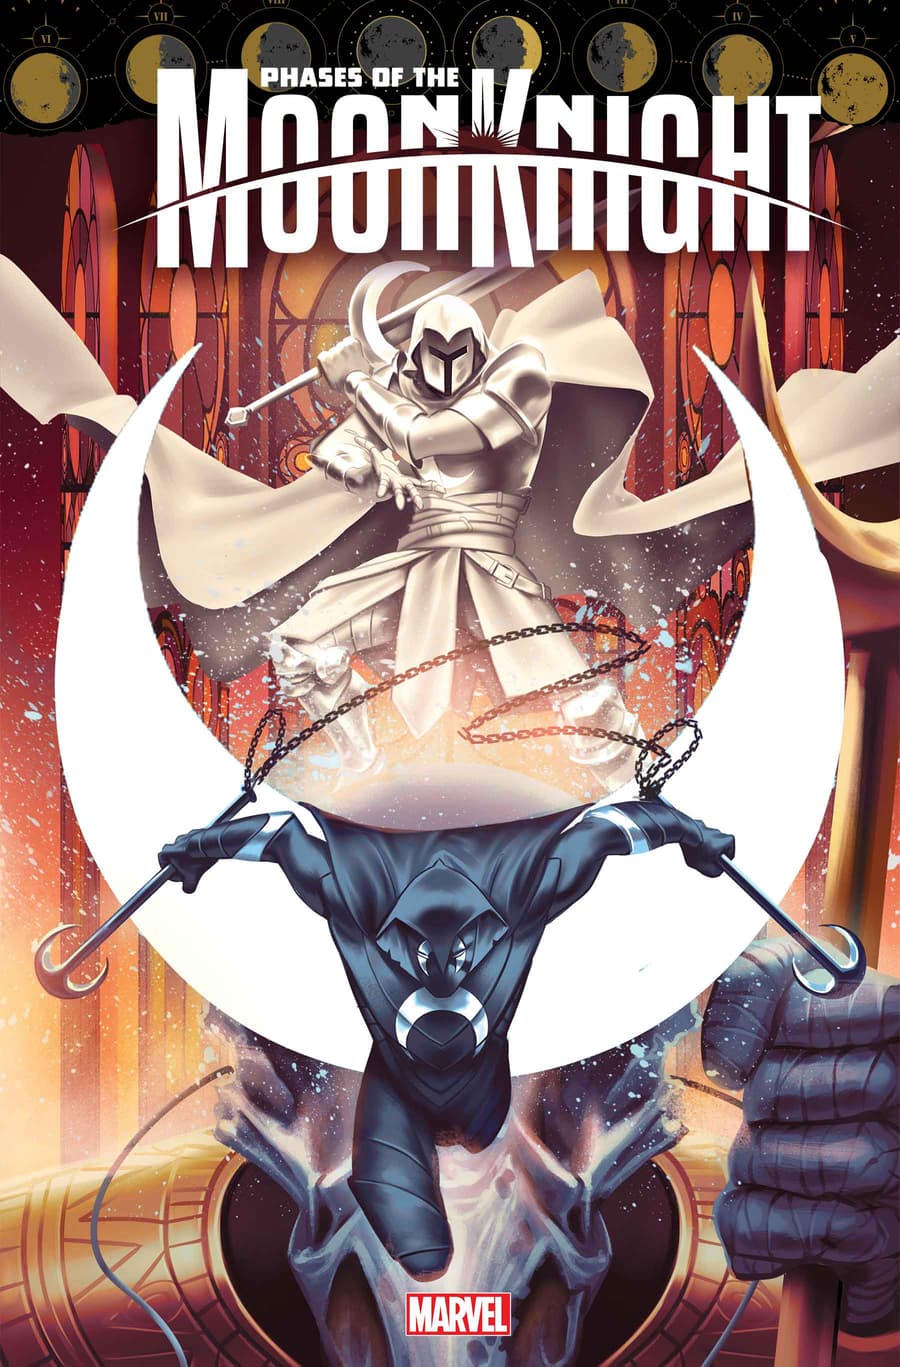 Phases of the Moon Knight #1 Cover by Mateus Manhanini